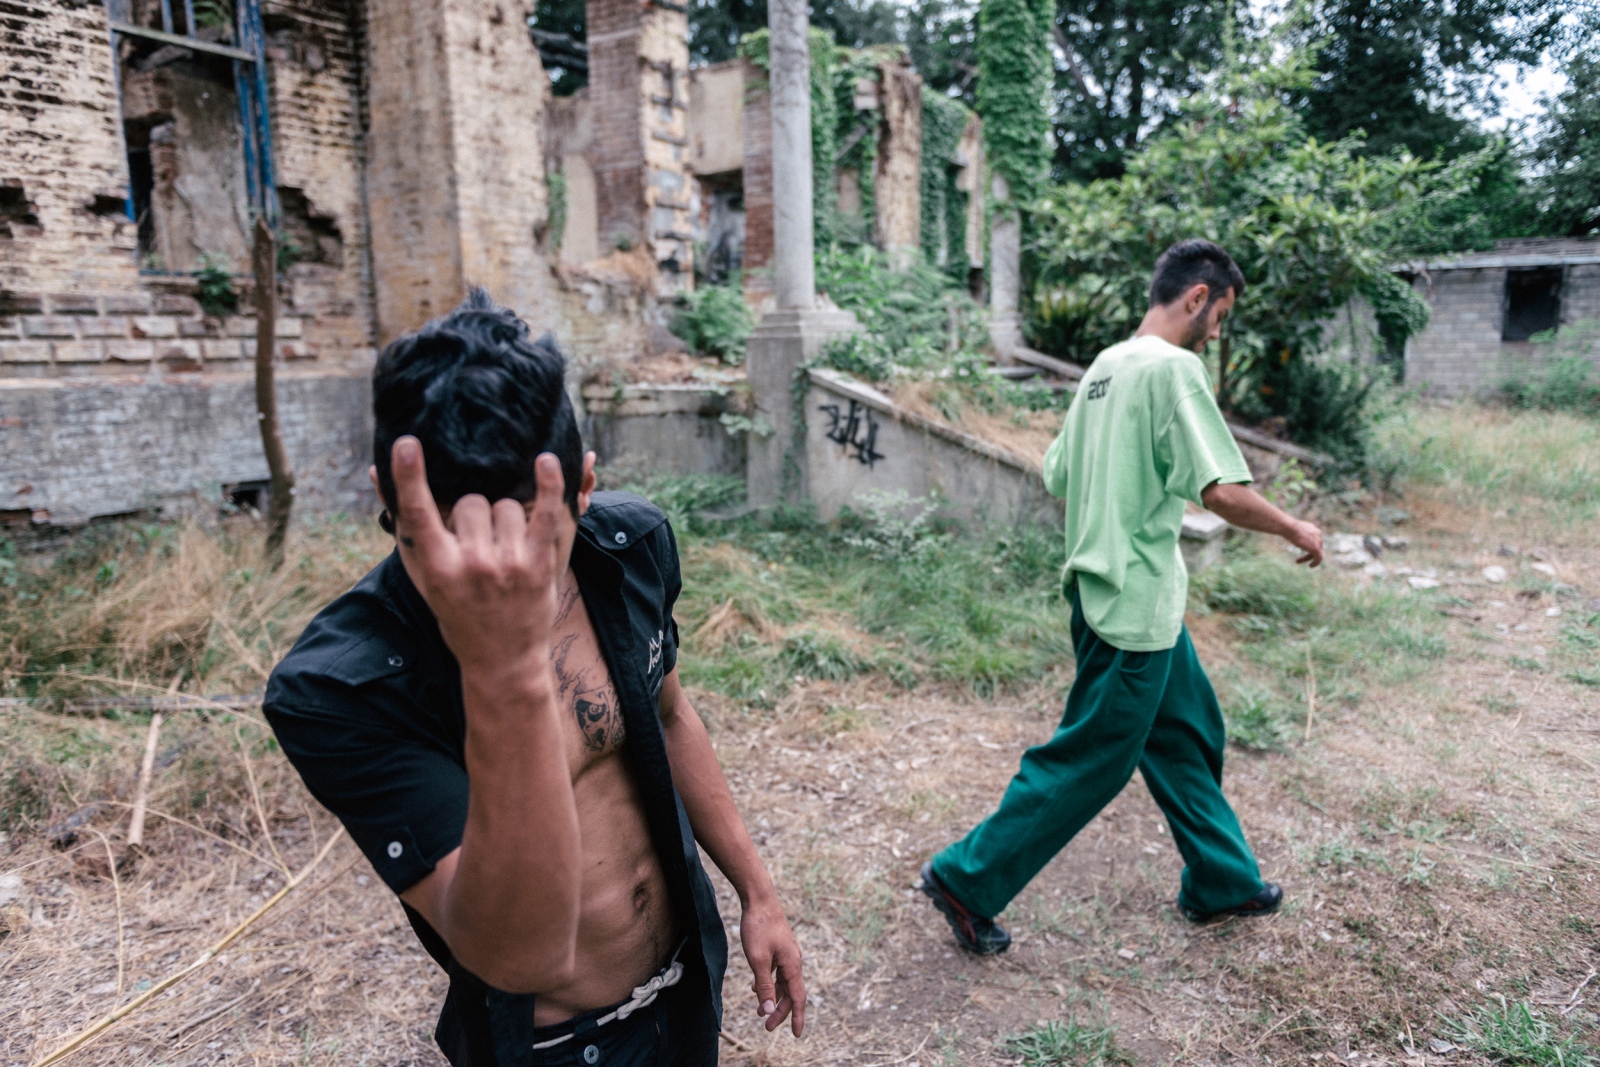  The signs and gestures they in... norms. Rasht, Iran, Jun 2014. 